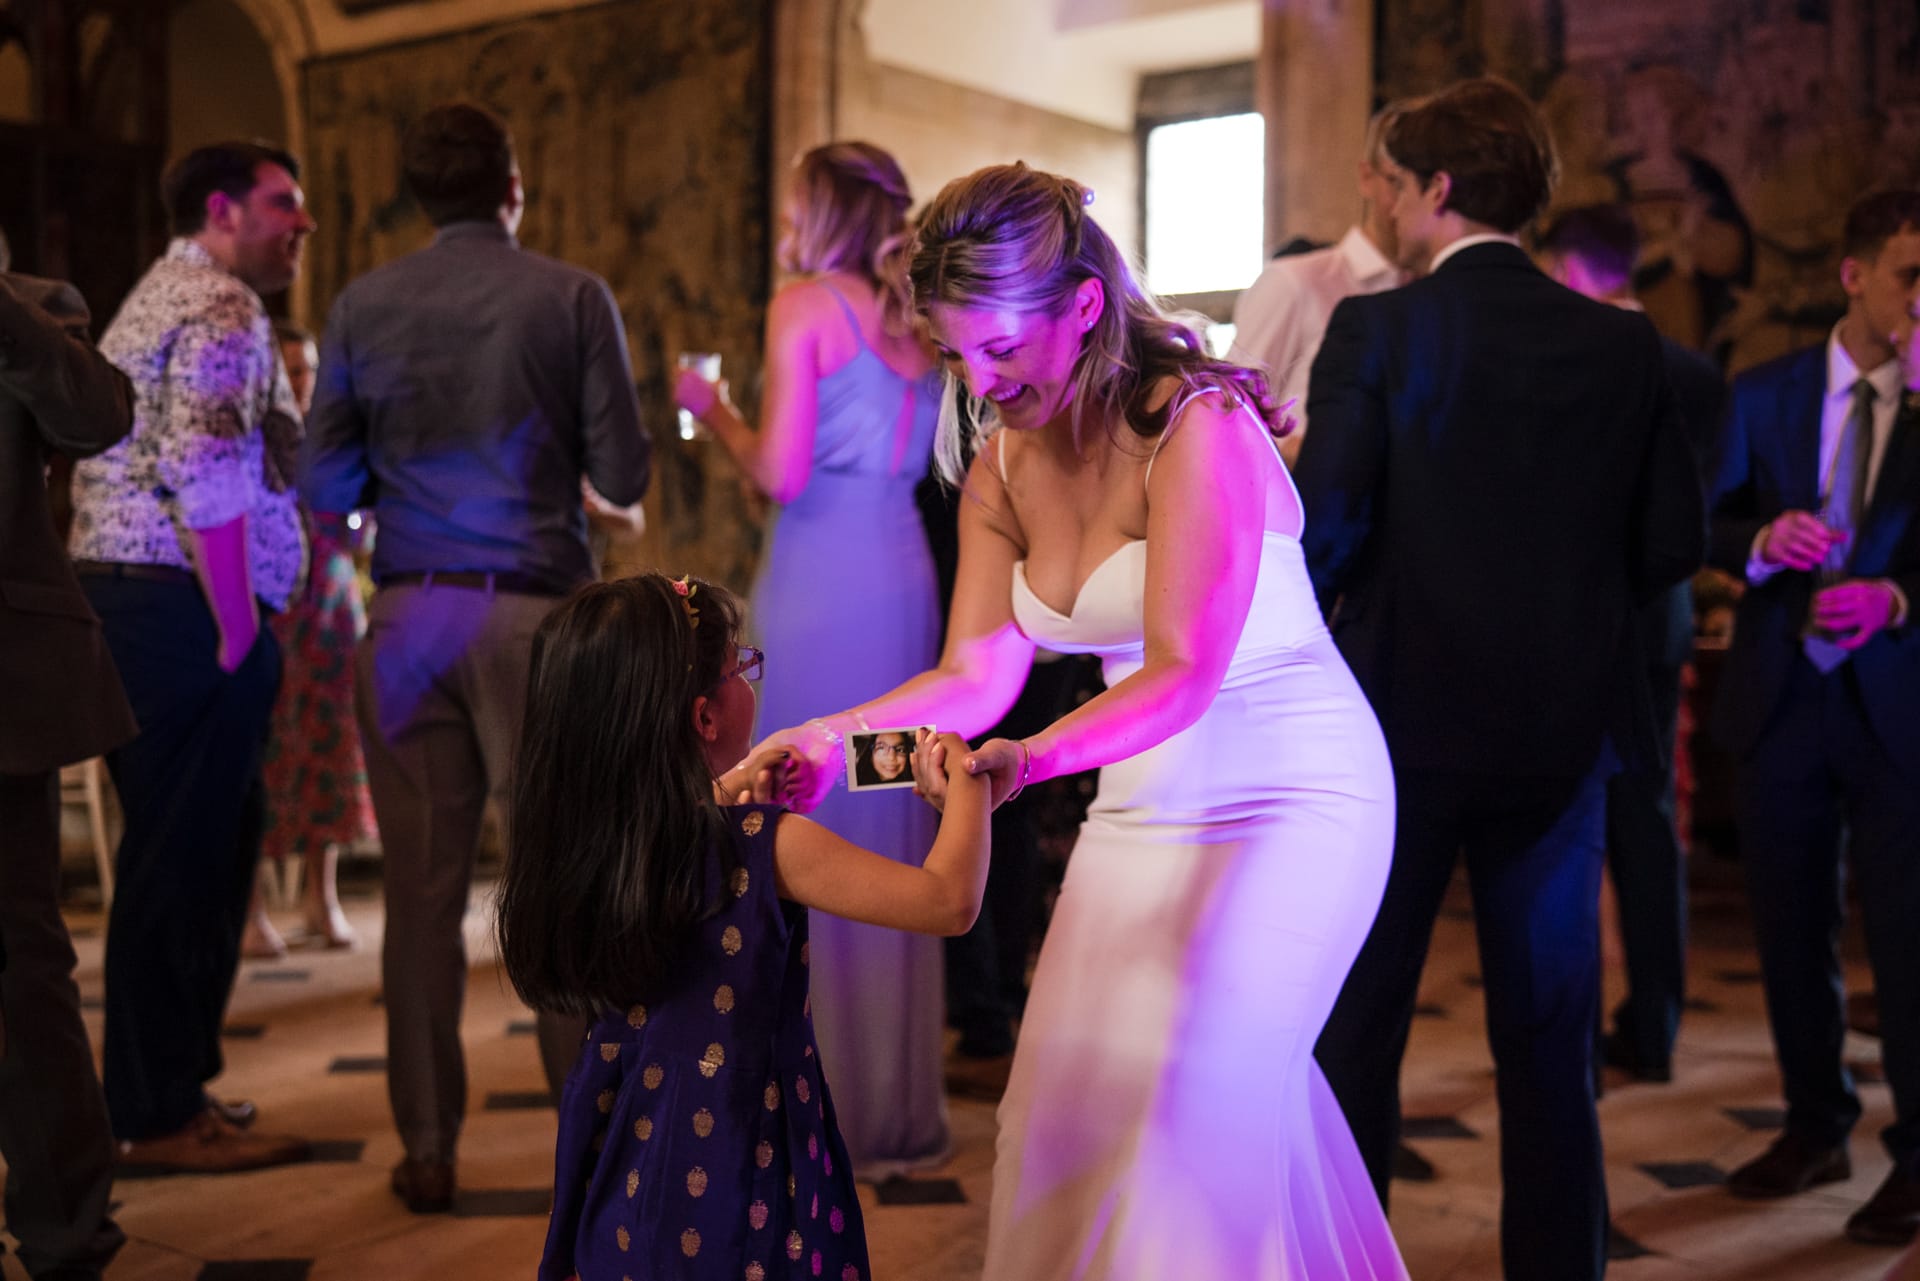 Bride dancing with young girl holding a photo of herself